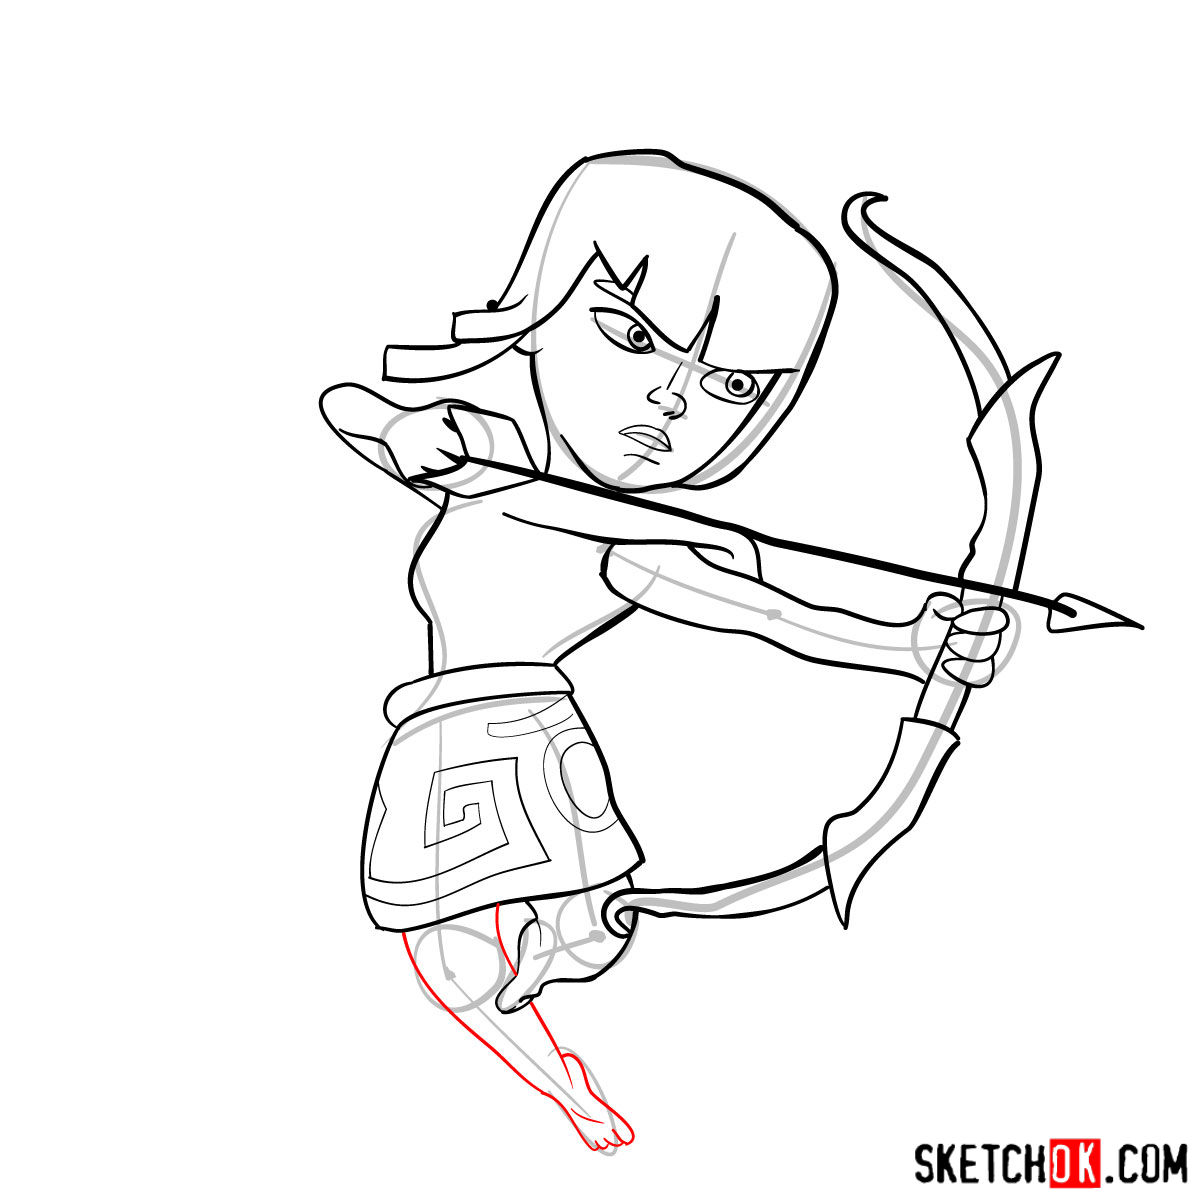 How to draw Archer from Clash of Clans - step 09